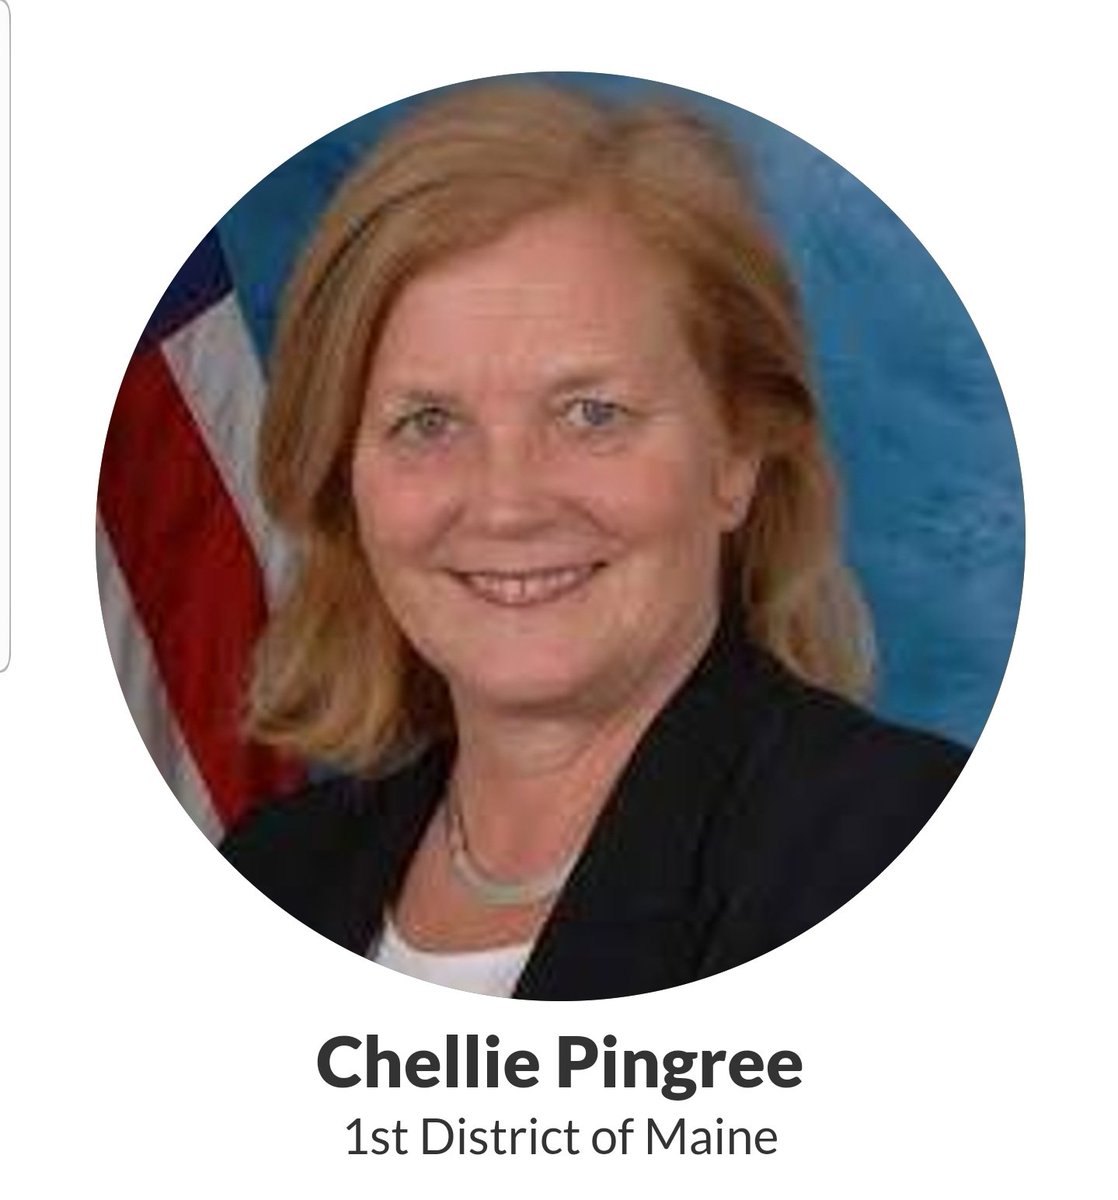 Chellie Pingree, Maine's 1st District https://pingree.house.gov/ 41/98